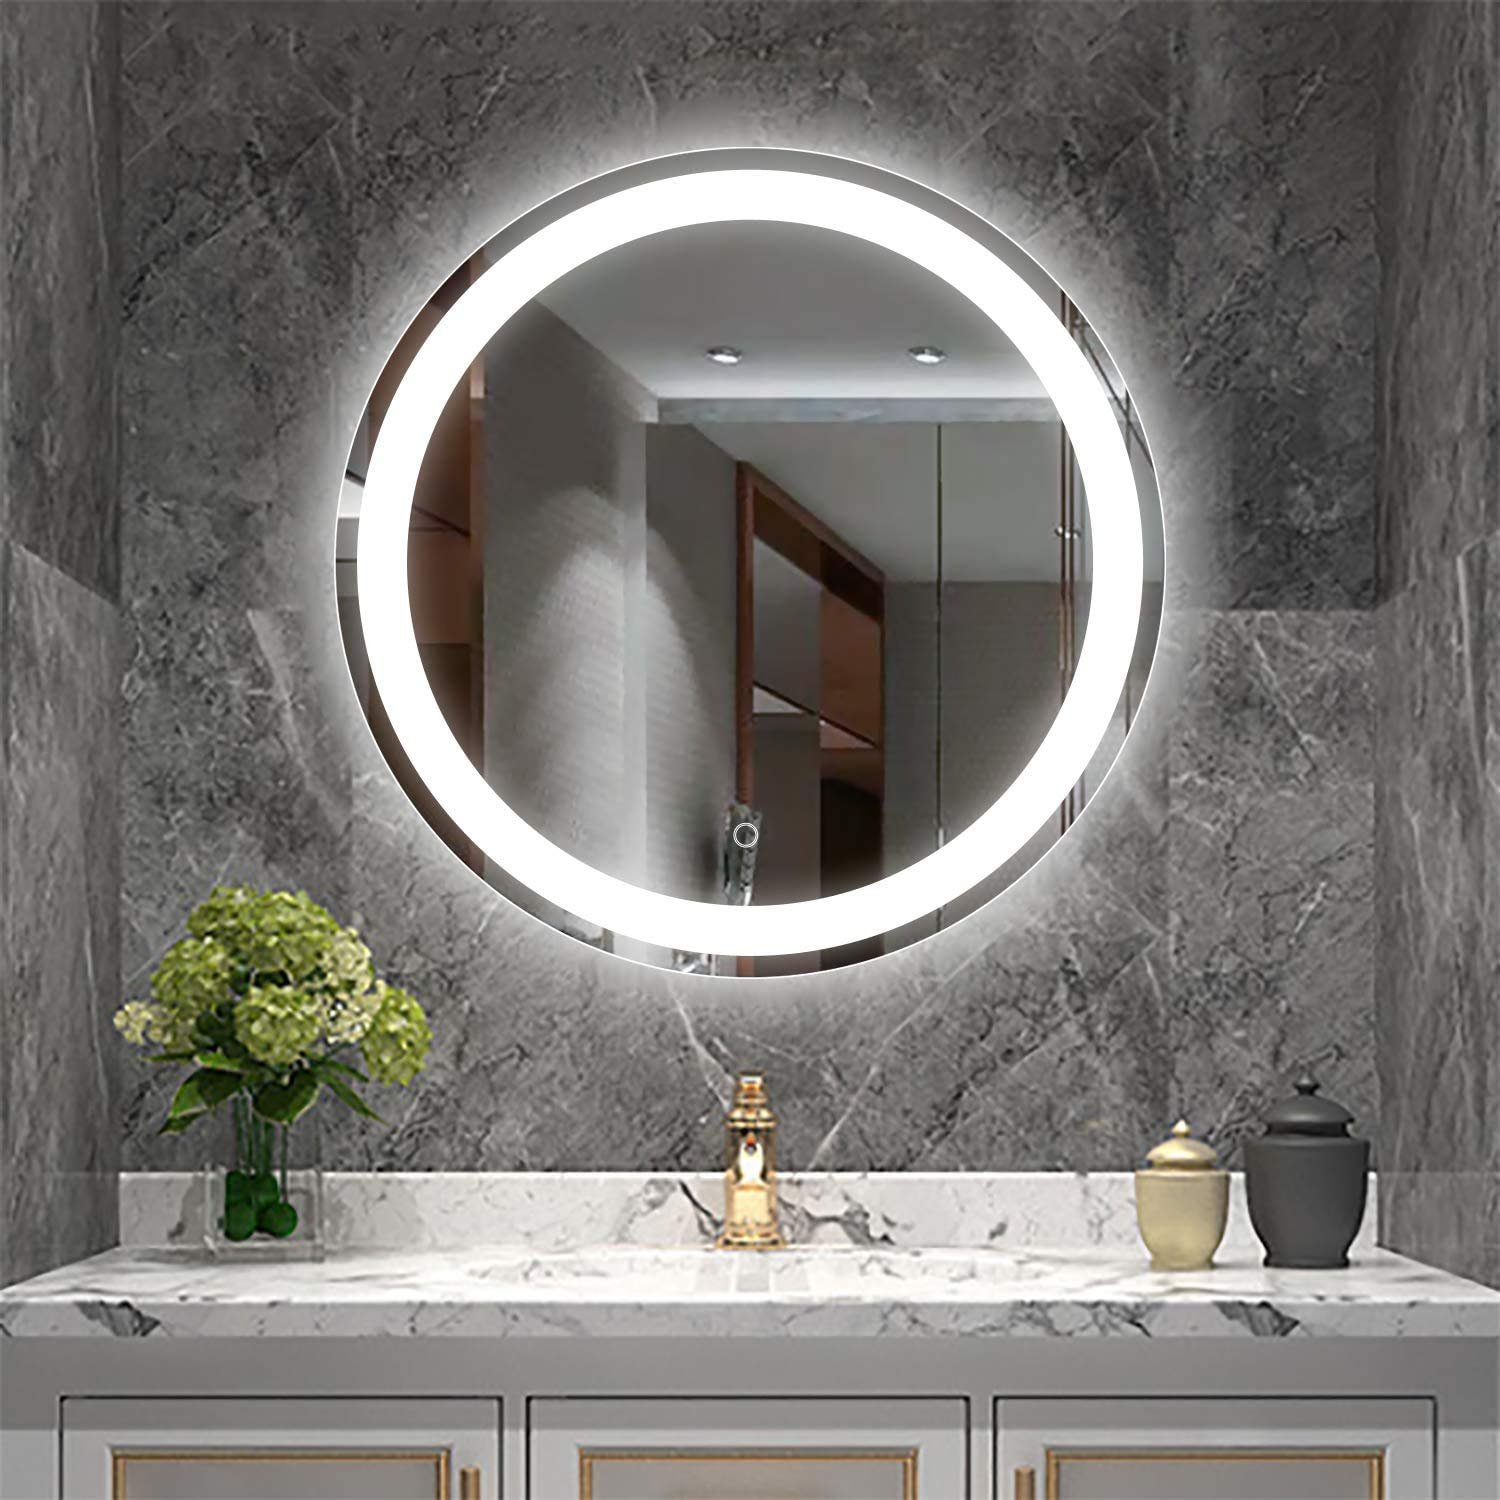 Creating a Timeless Look: LED Mirrors with Clocks for Every Home Décor